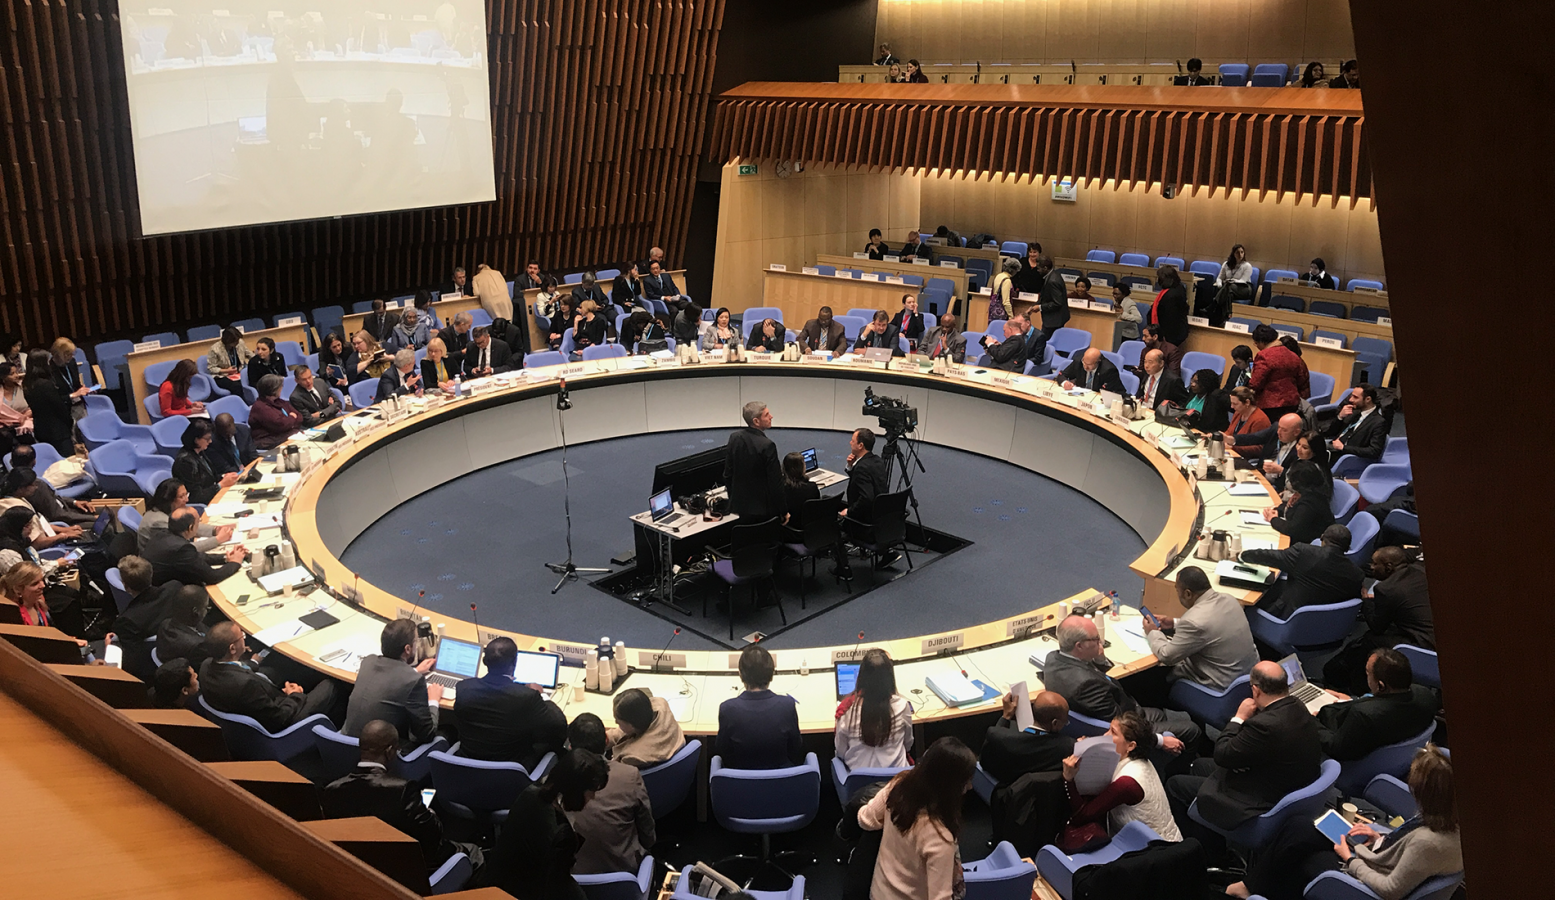 144th session of the WHO Executive Board © NCDA / L. Westerman